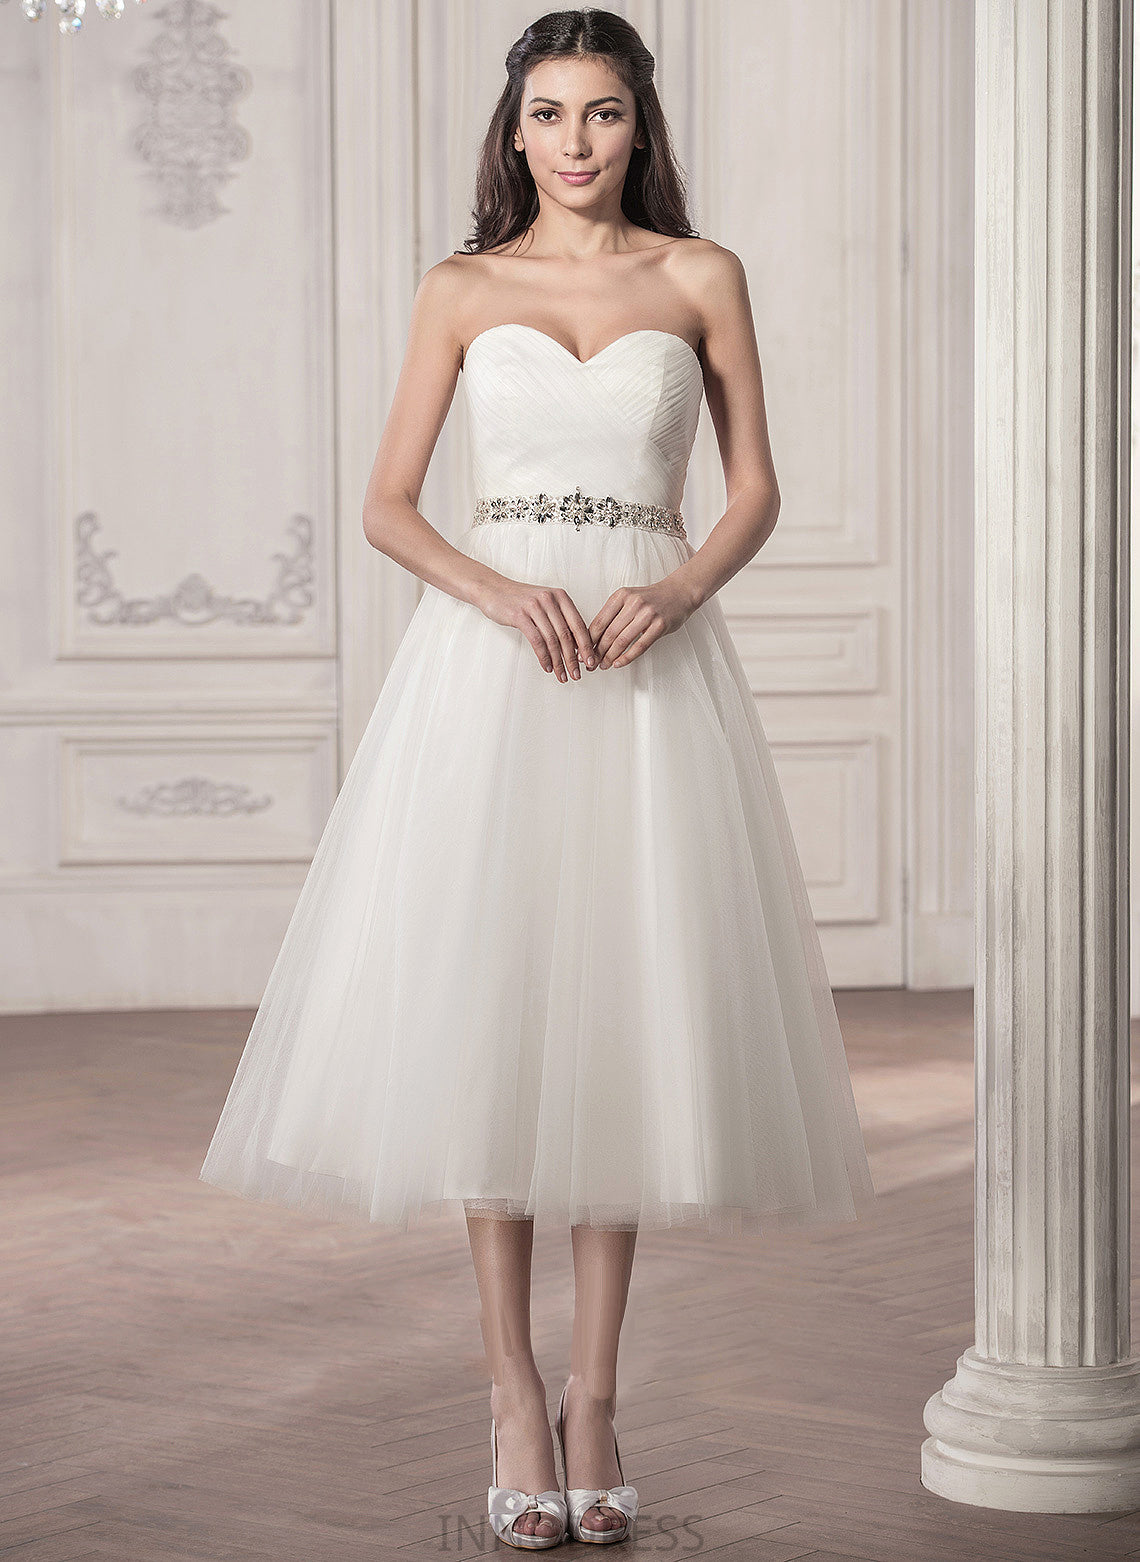 Ruffle Wedding Dresses With Wedding Sequins Sweetheart Beading Tea-Length A-Line Tulle Dress Serena